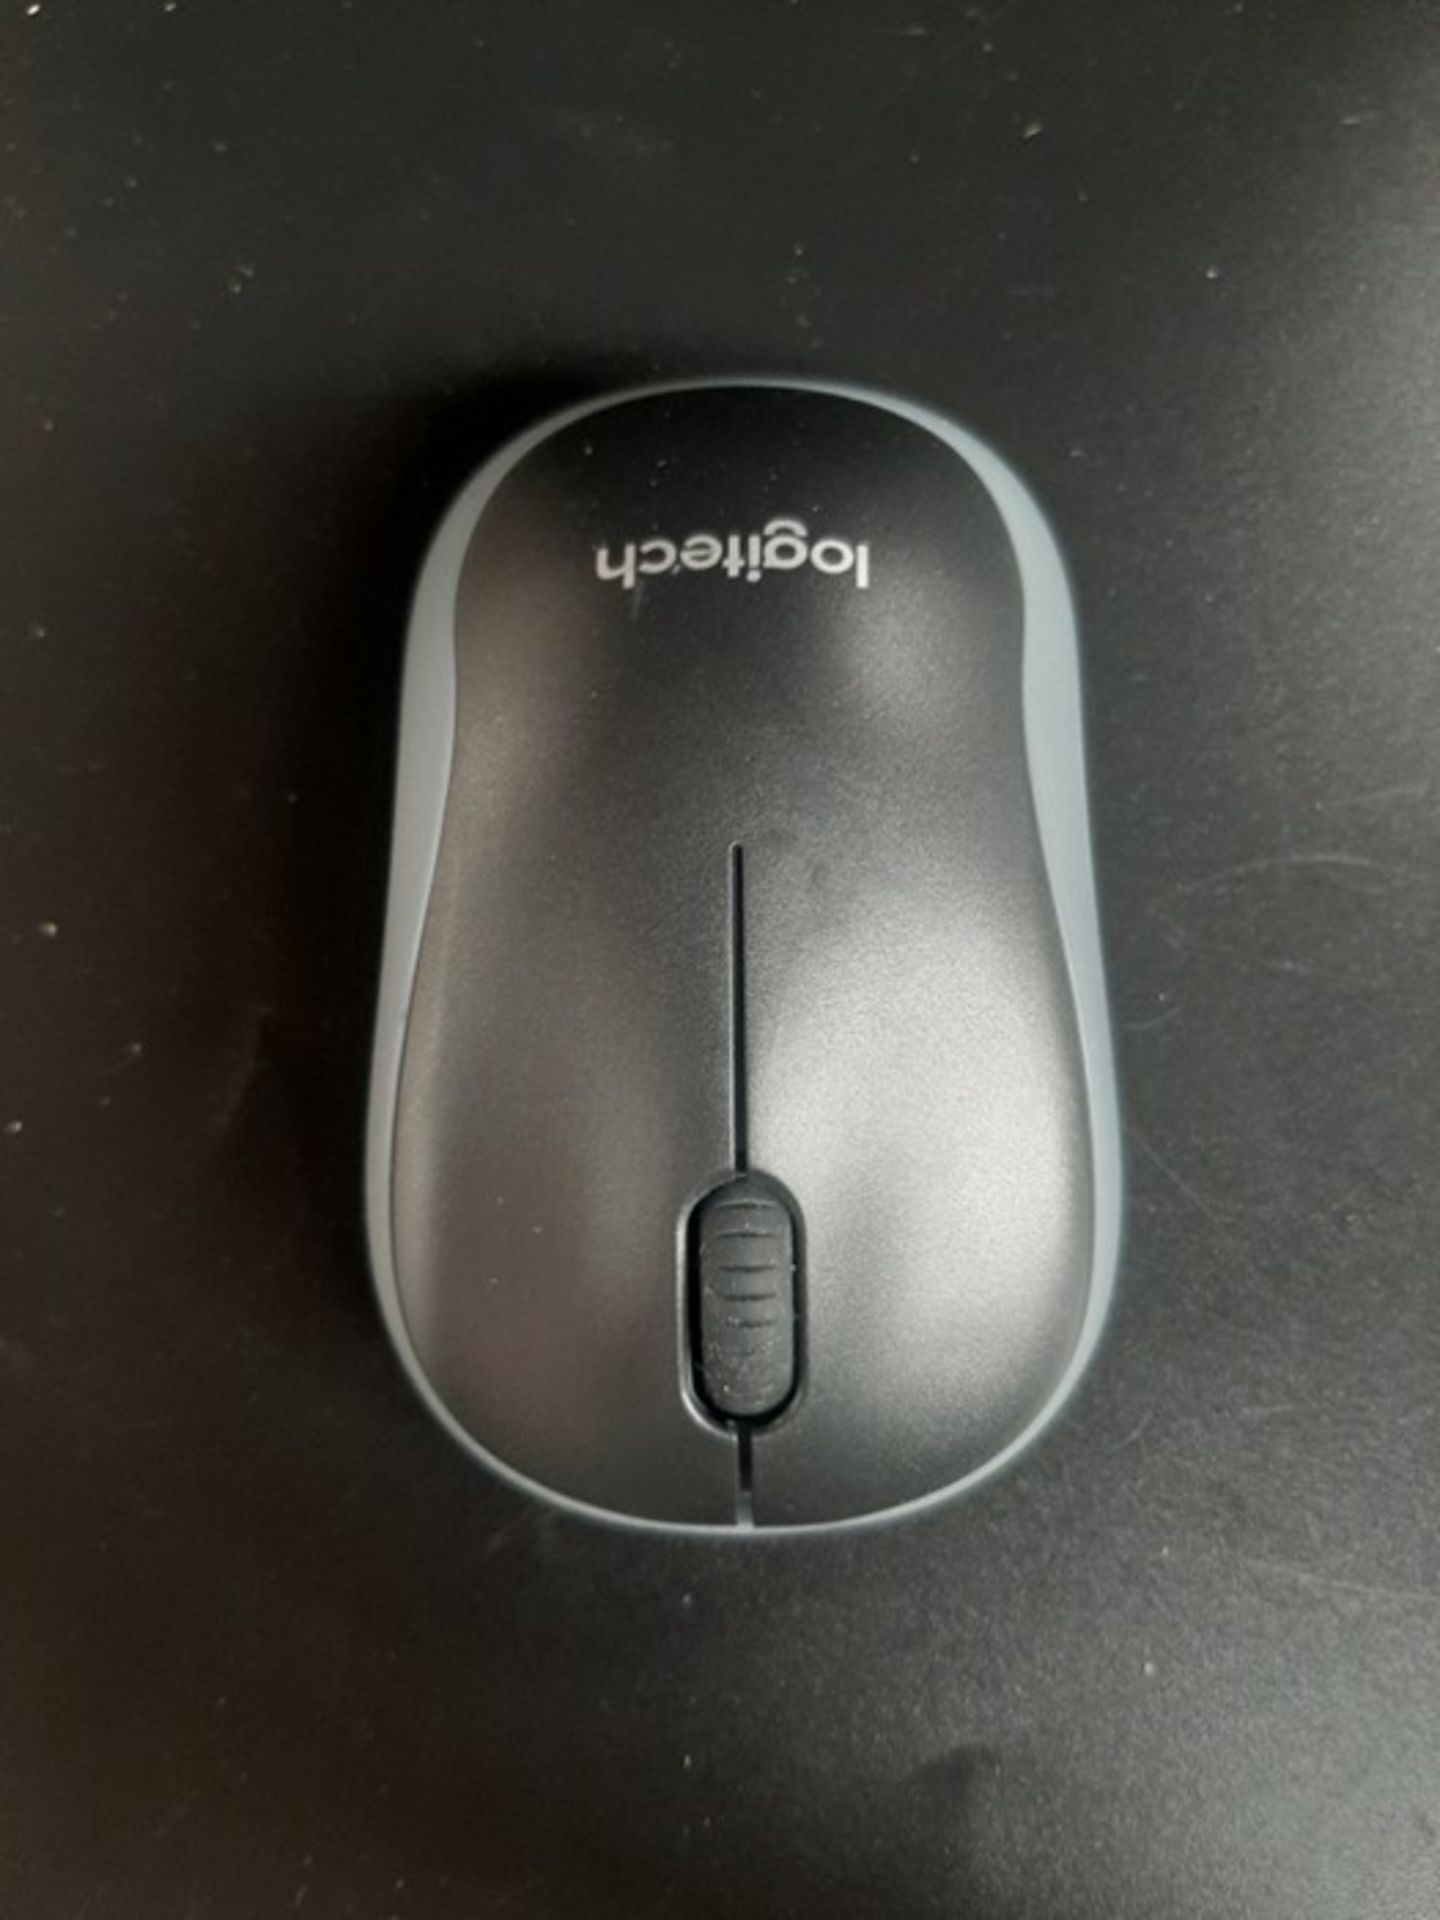 Logitech M185 Wireless Mouse, 2.4GHz with USB Mini Receiver - Image 2 of 2